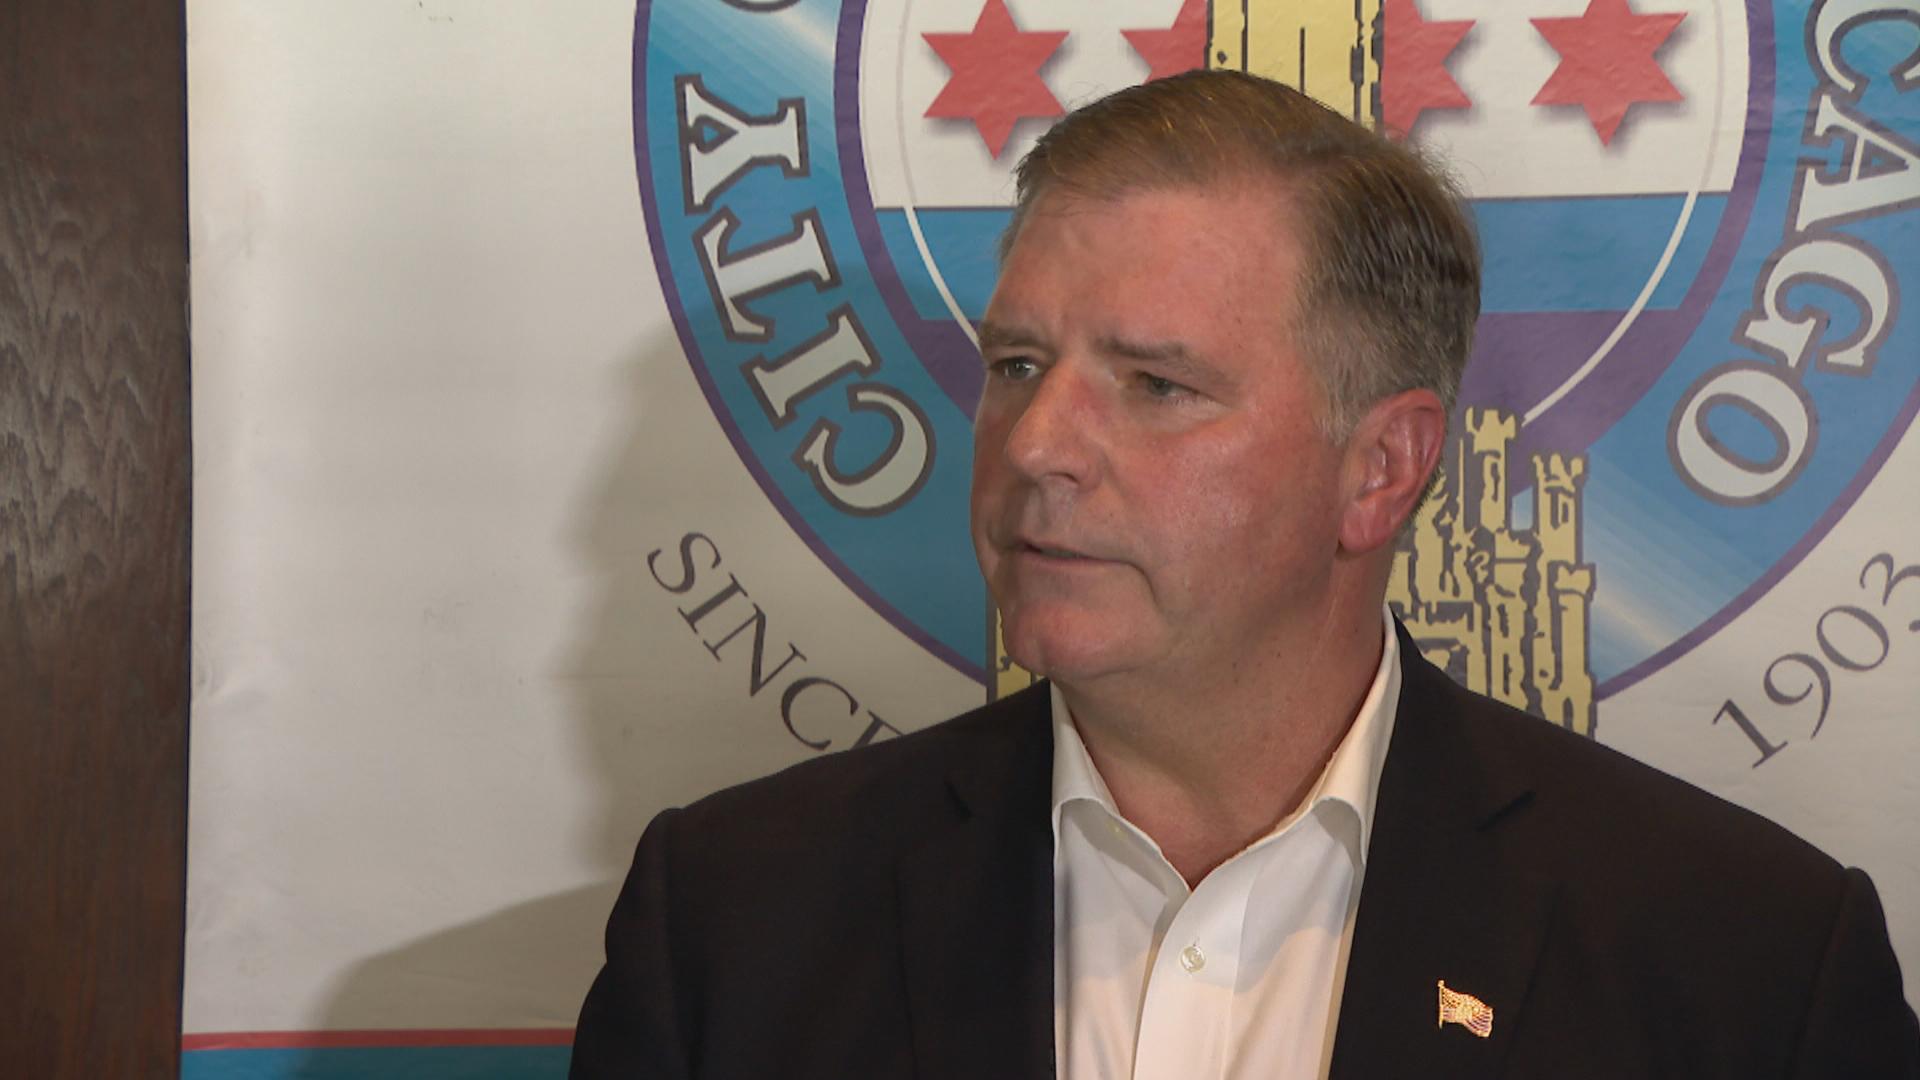 Illinois Senate Republican Leader Bill Brady speaks at the City Club of Chicago on Tuesday, June 18, 2019. (WTTW News)